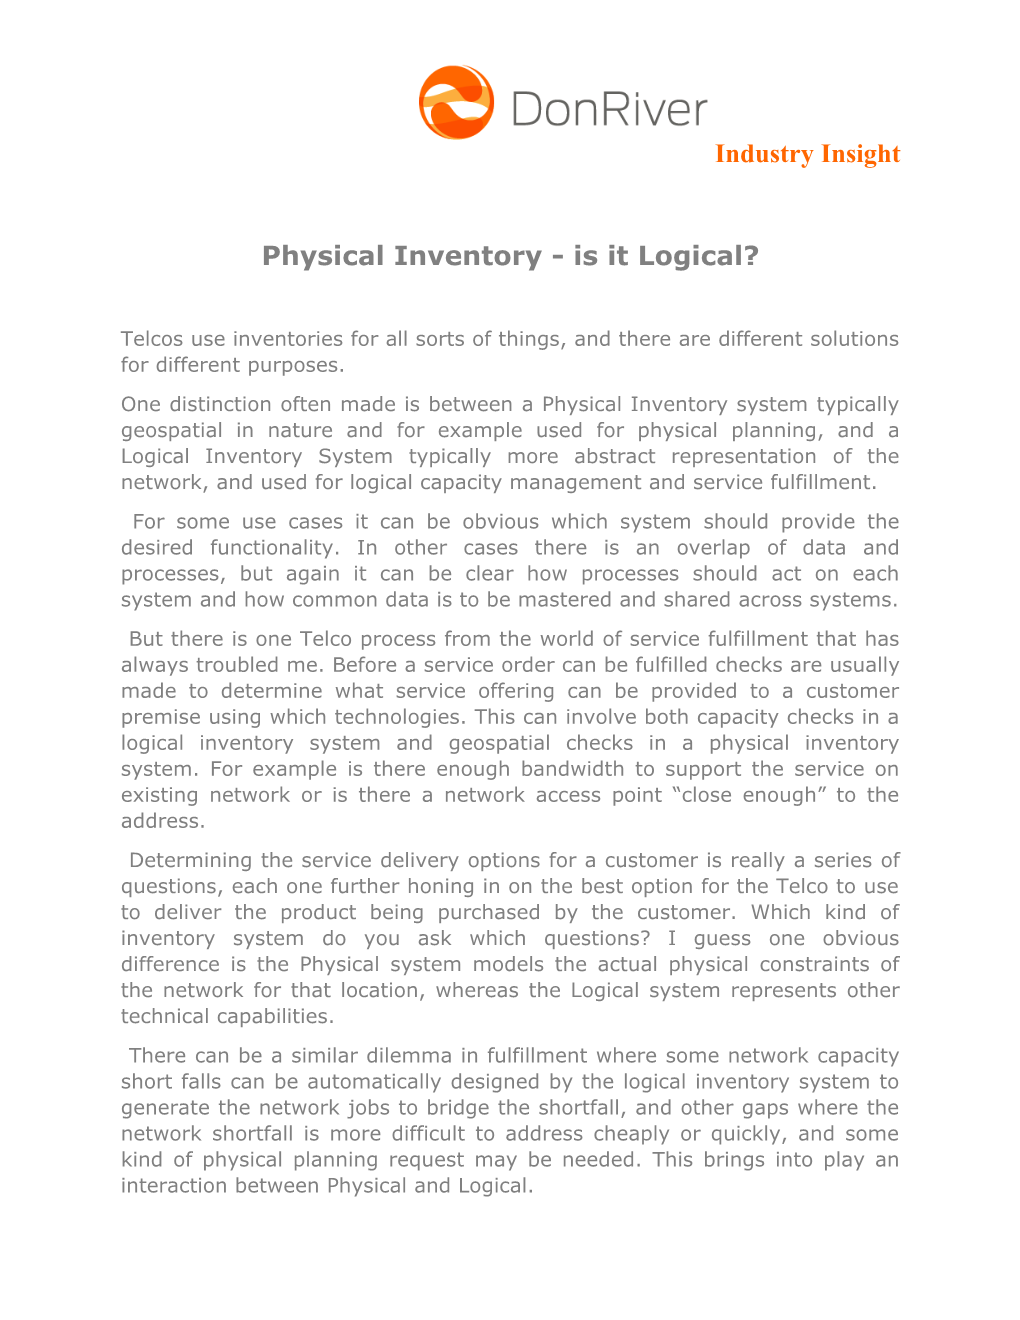 Physical Inventory - Is It Logical?